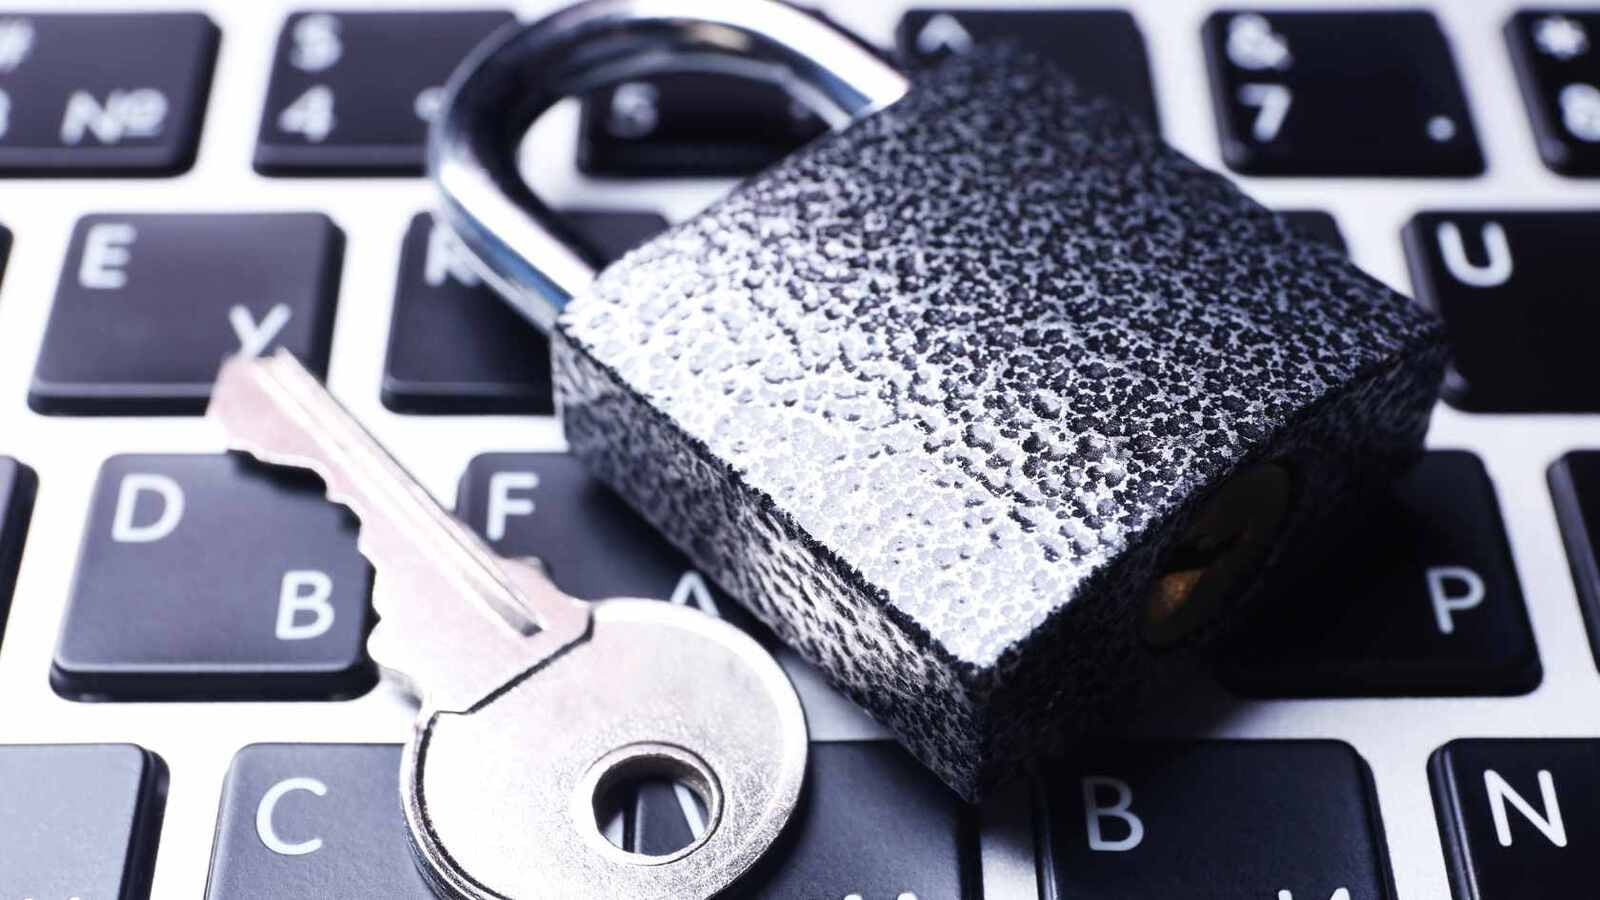 padlock and key on keyboard for cybersecurity supply chain hack prevention